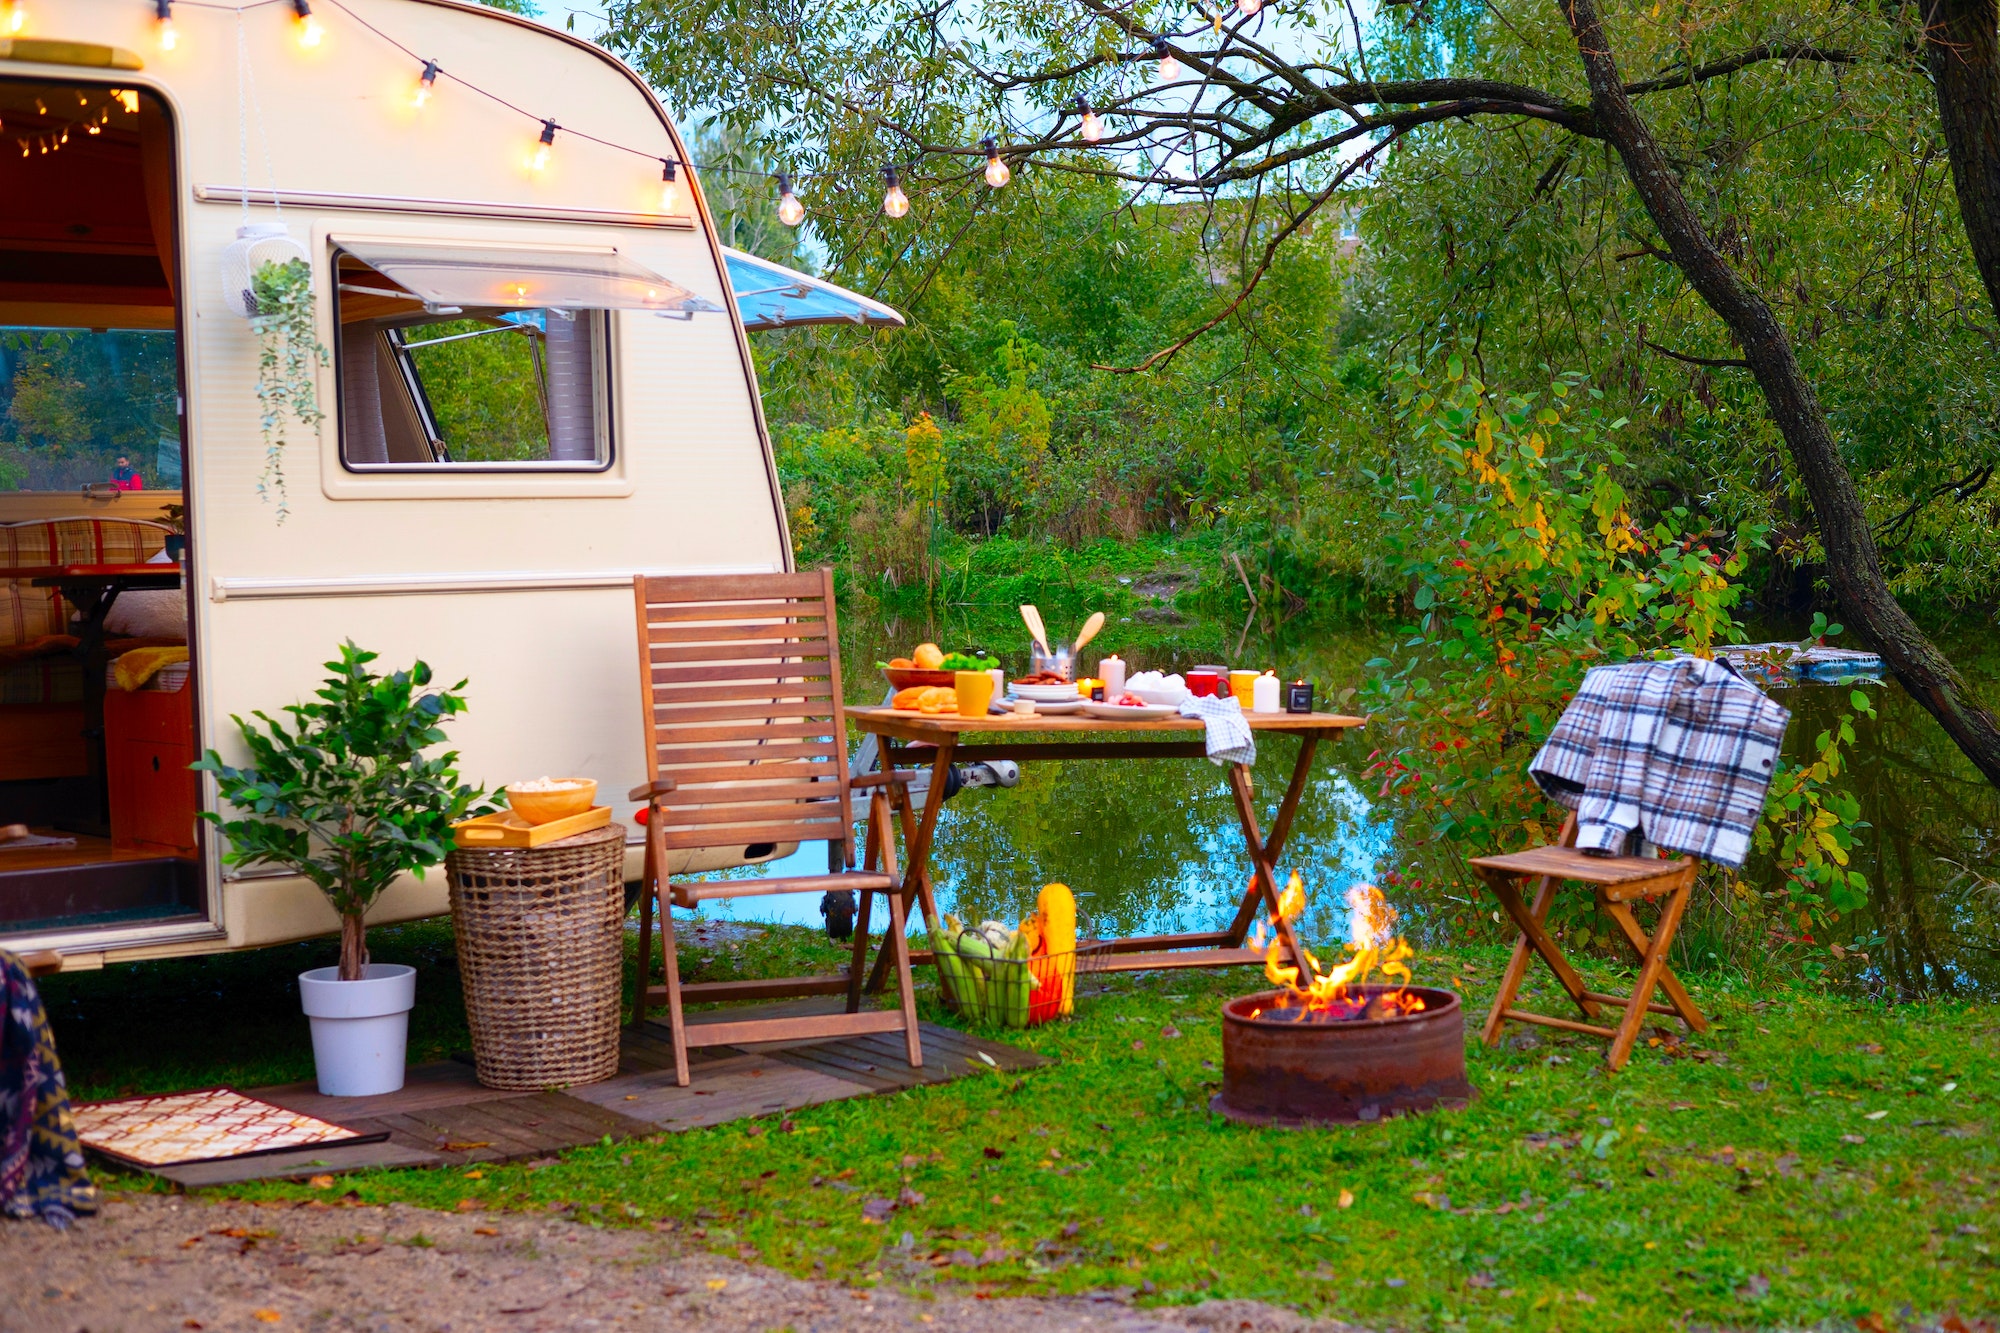 Travel Trailers: The perfect way to explore the world!